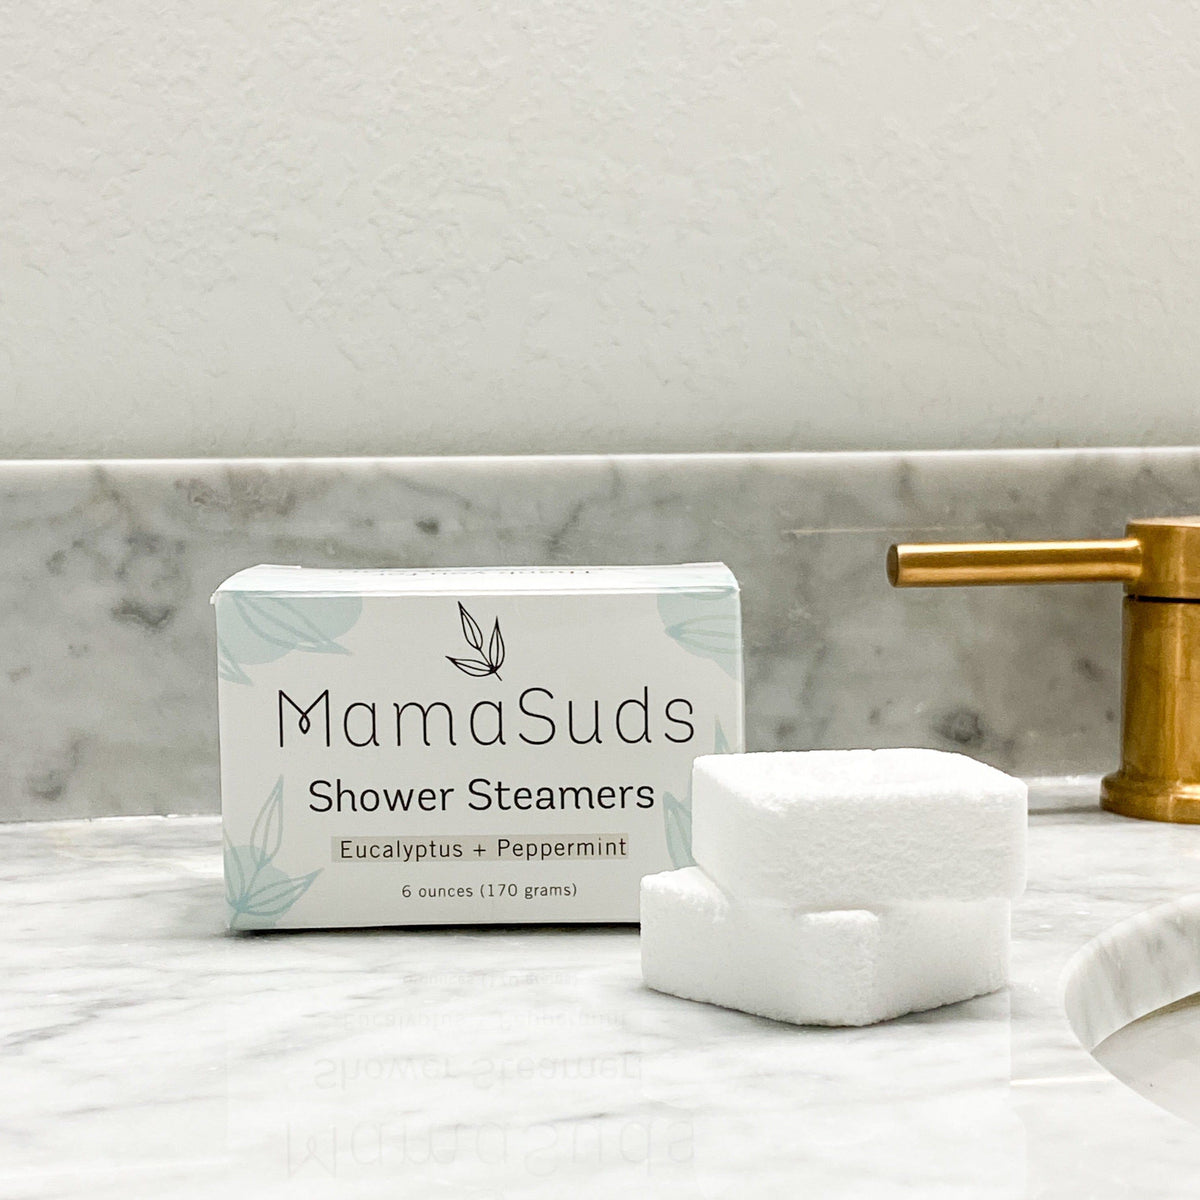 MamaSuds Shower Steamers on counter